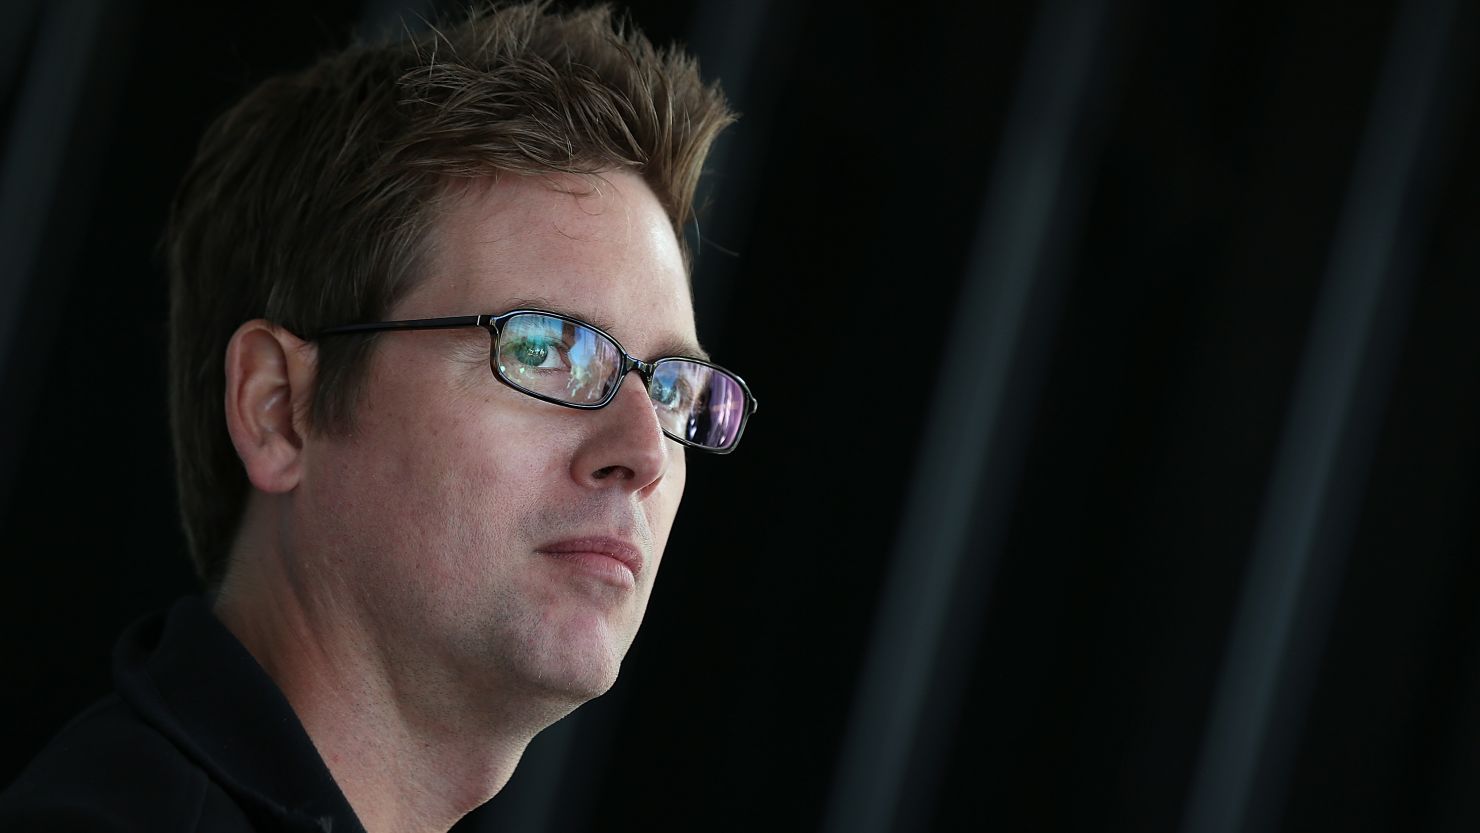 Twitter co-founder Biz Stone has some ideas for improving Facebook.